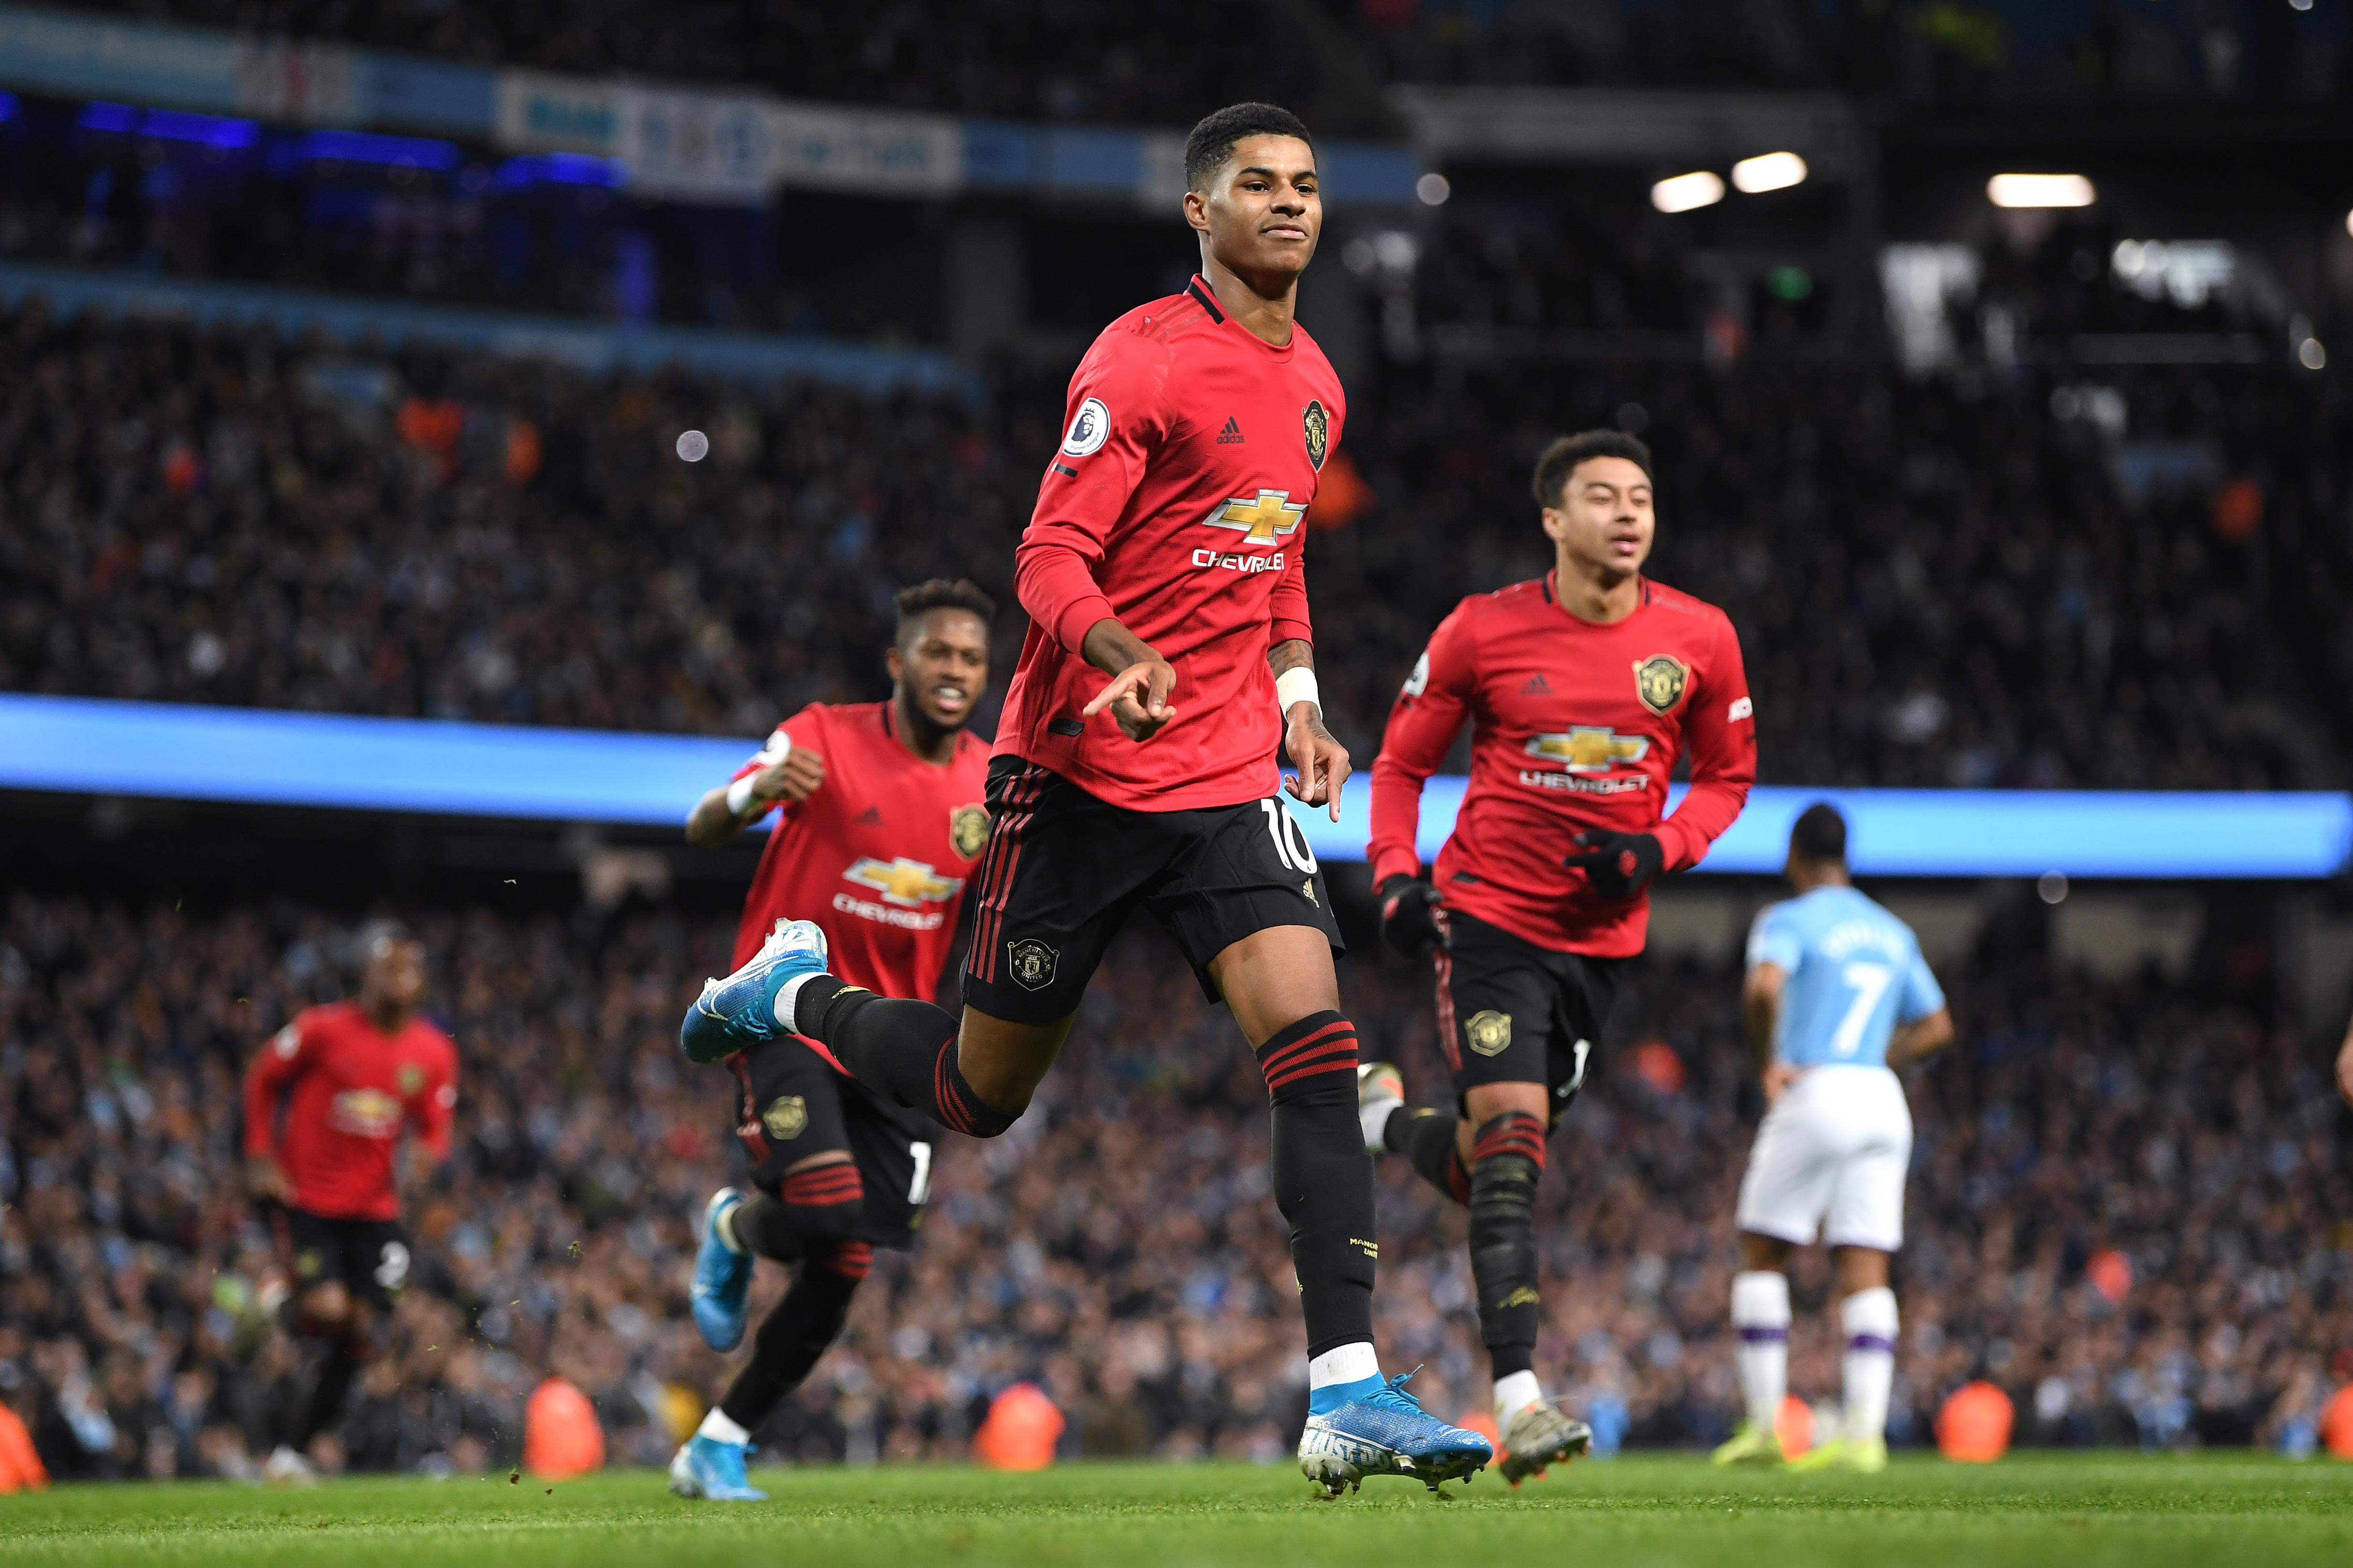 Manchester United put on a fine counter-attacking display to beat Manchester City 2-1 (Photo by Michael Regan/Getty Images)